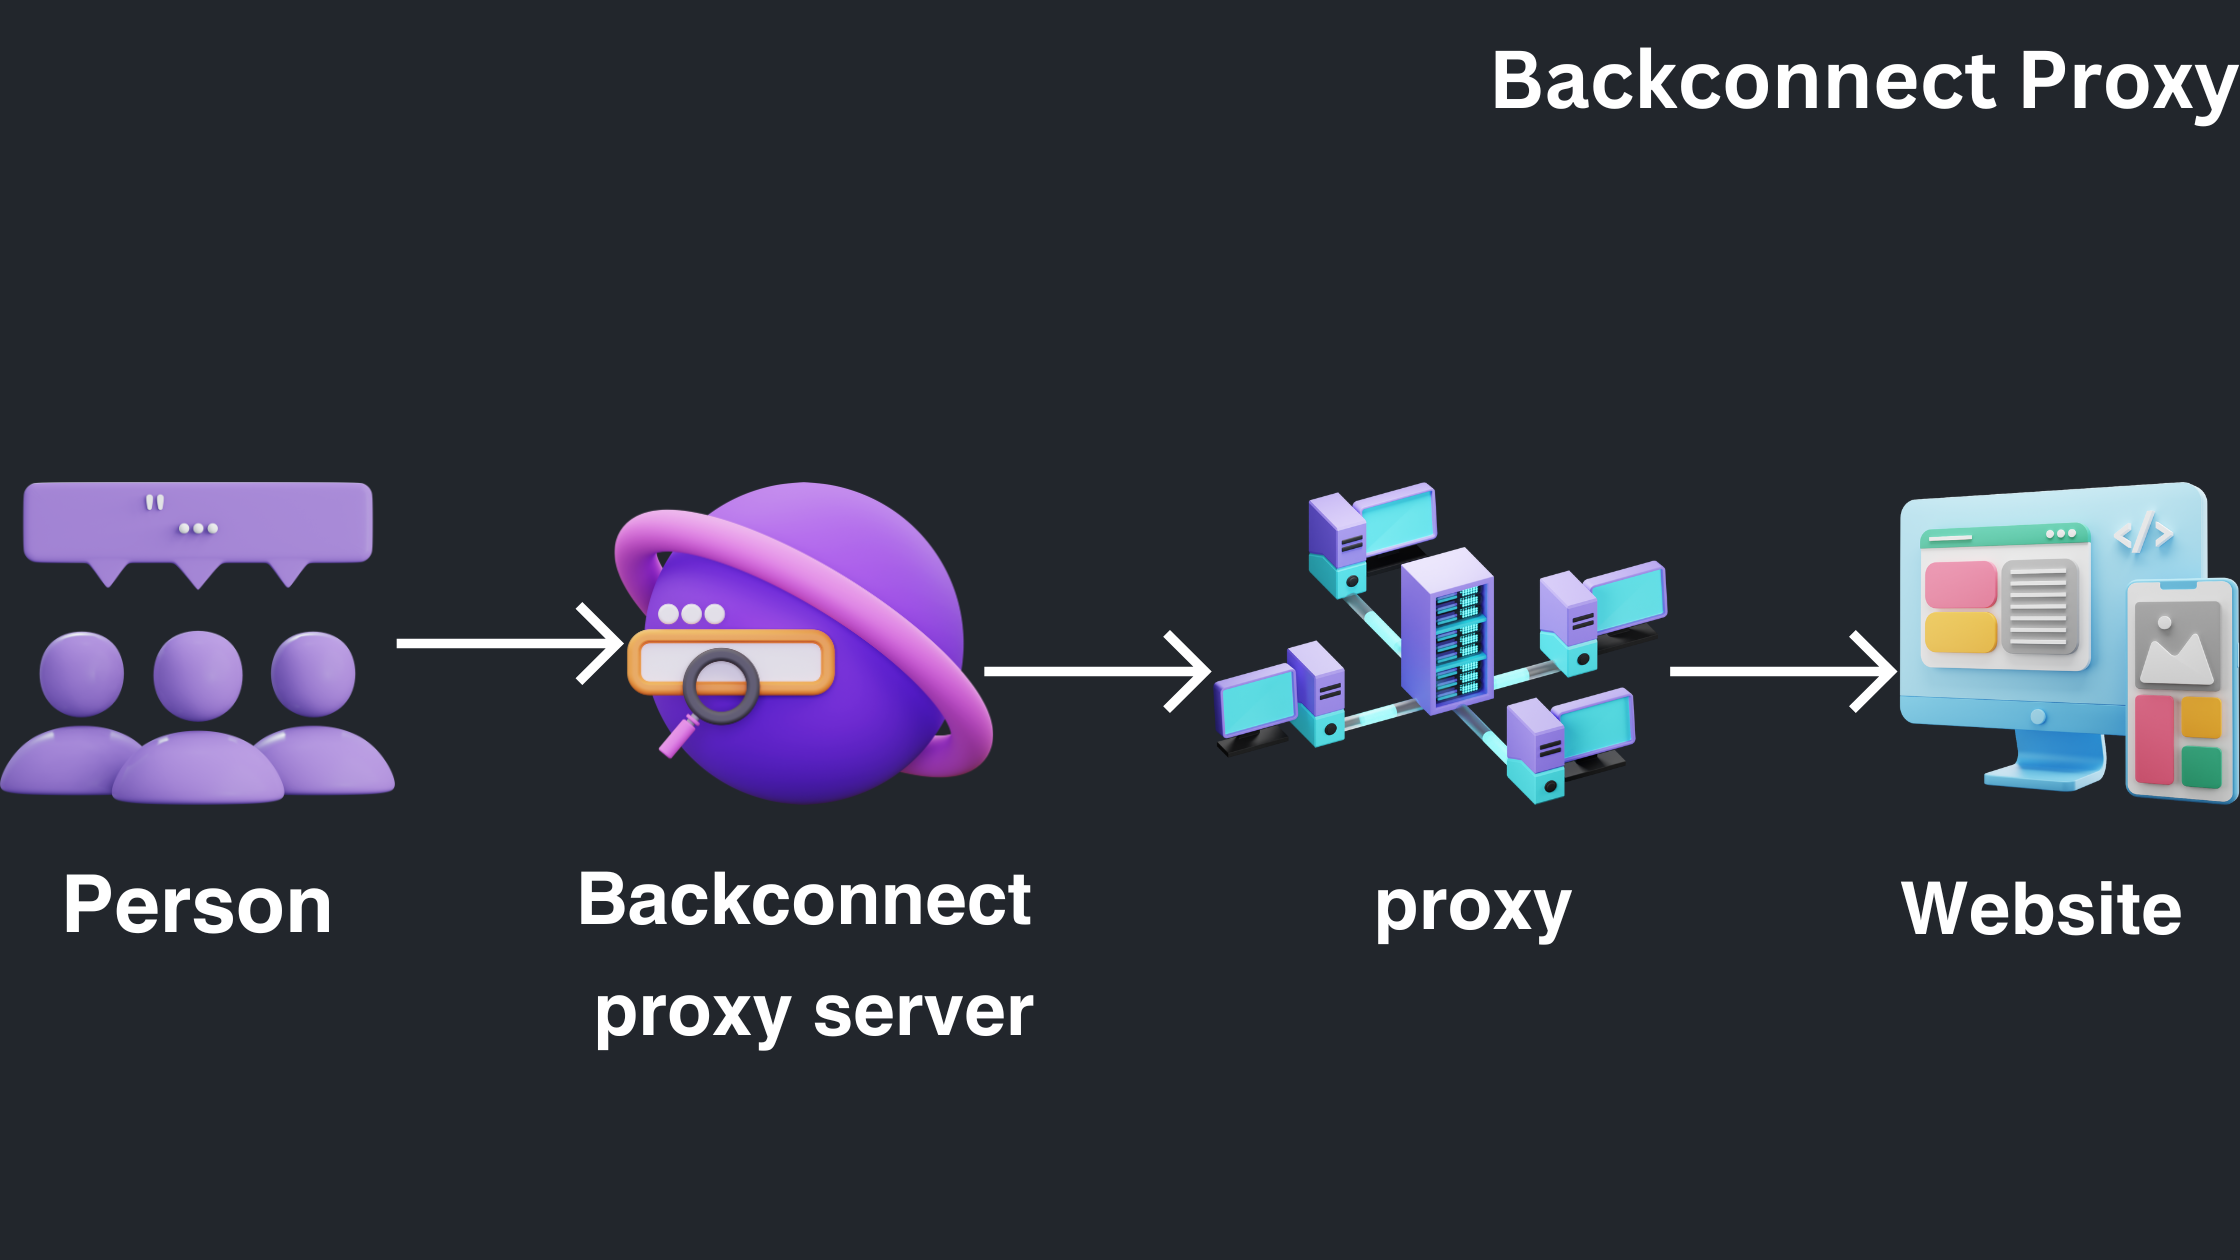 What is a Backconnect Proxy